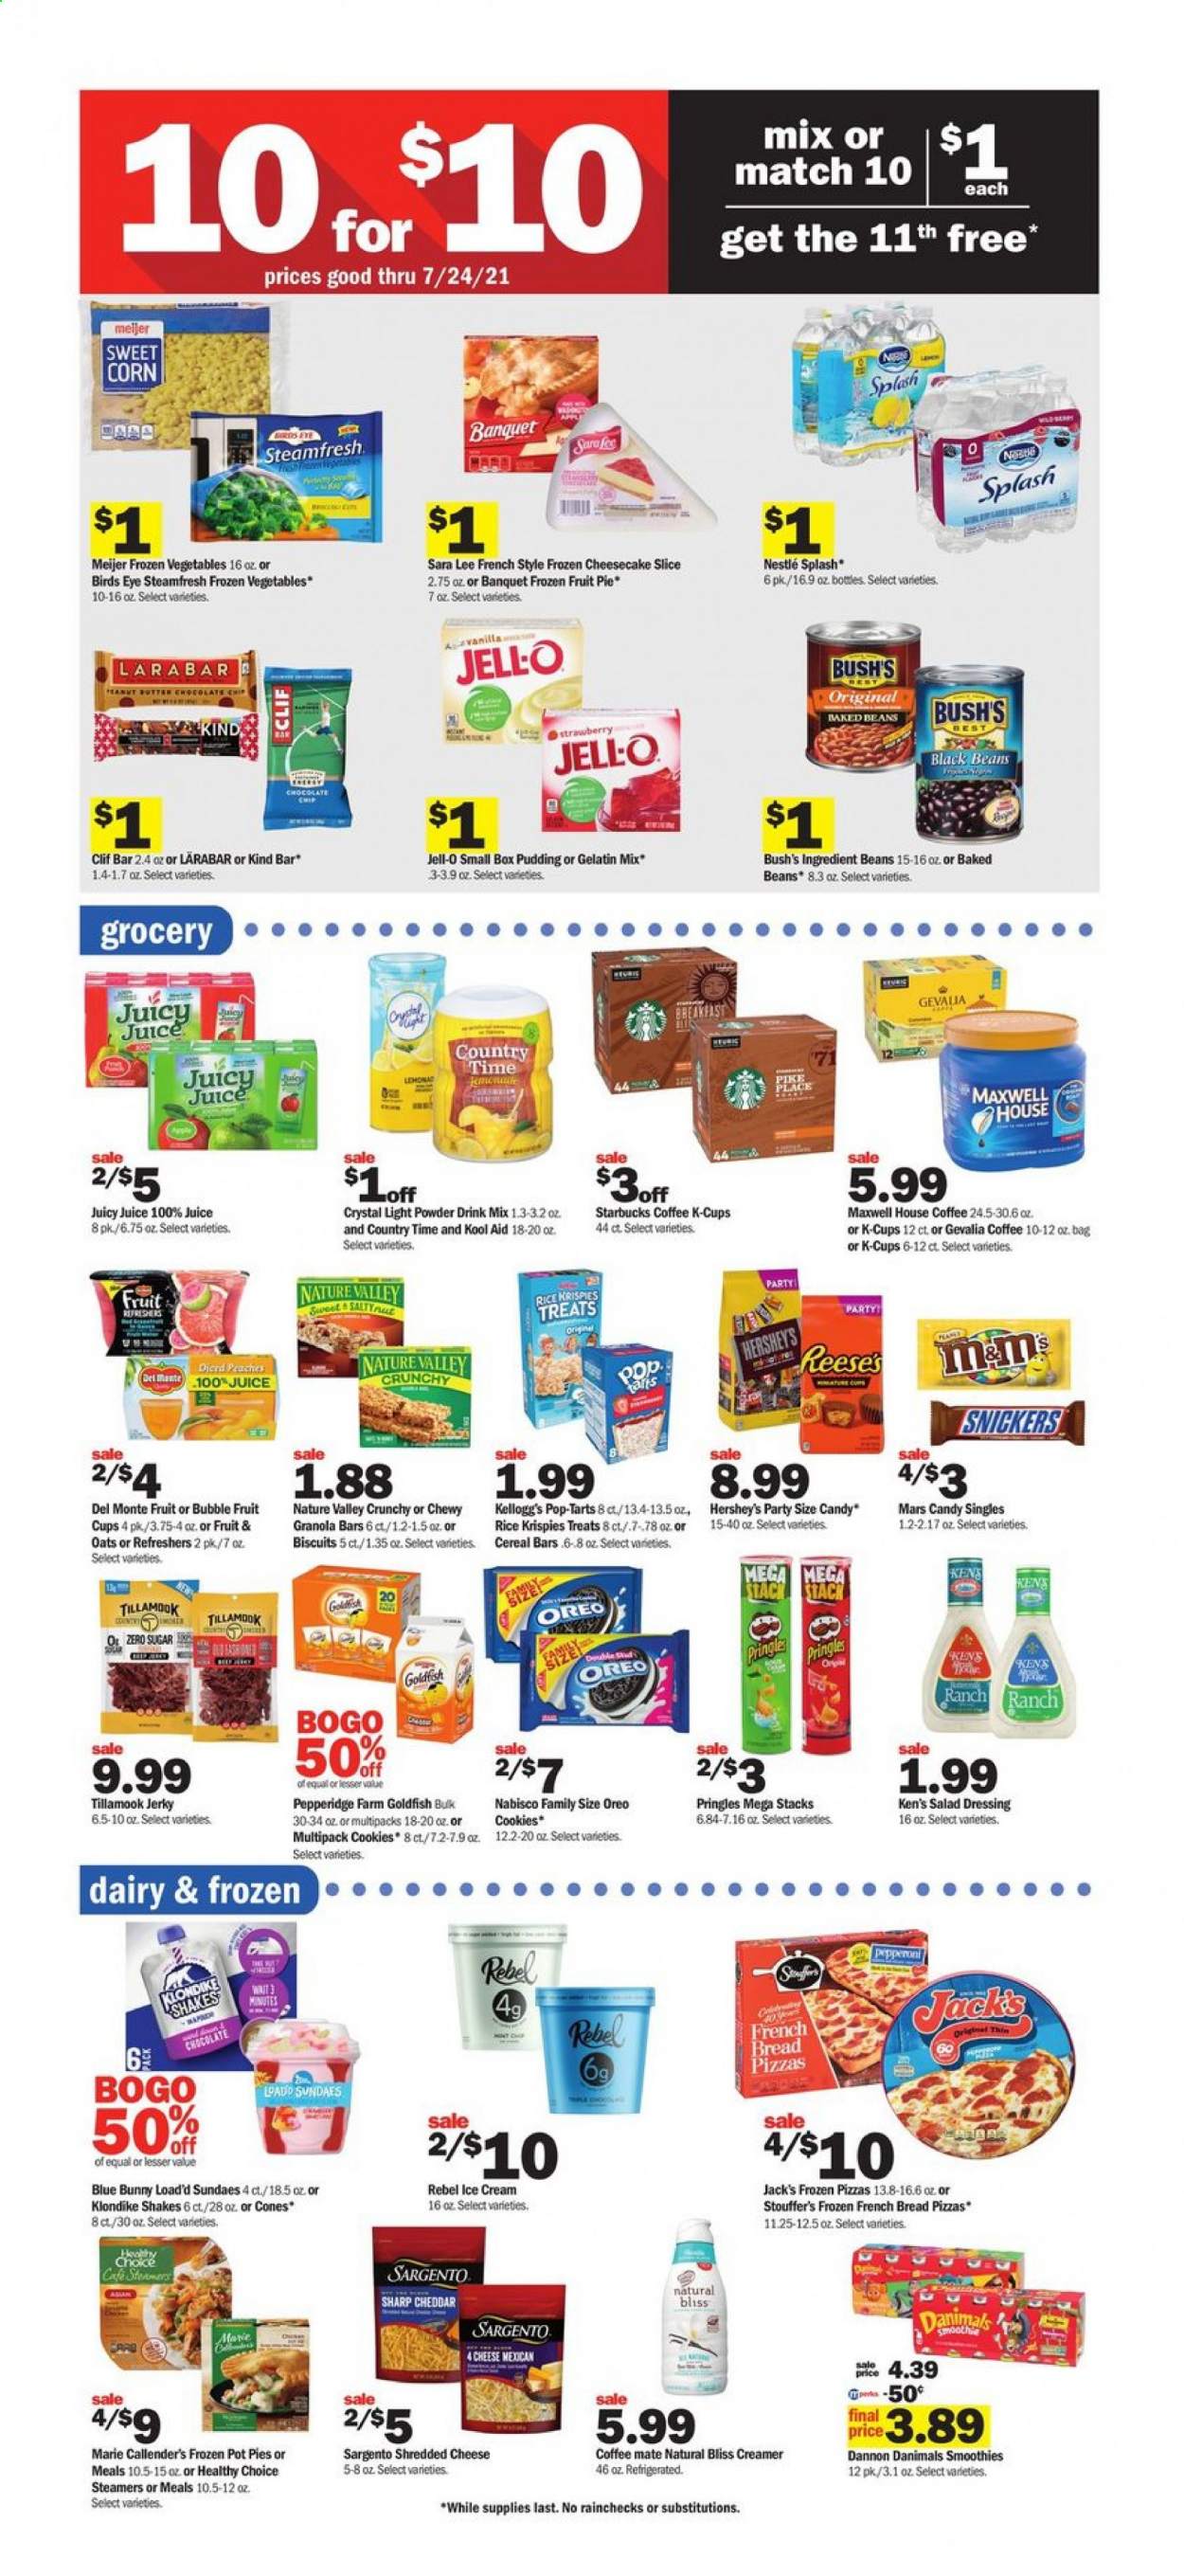 thumbnail - Meijer Flyer - 07/18/2021 - 07/24/2021 - Sales products - fruit cup, bread, pie, Sara Lee, french bread, pot pie, corn, sweet corn, pizza, Bird's Eye, Healthy Choice, Marie Callender's, jerky, shredded cheese, Sargento, pudding, Oreo, Dannon, Danimals, Coffee-Mate, shake, creamer, ice cream, Reese's, Hershey's, Blue Bunny, frozen vegetables, Stouffer's, cookies, Nestlé, Snickers, Mars, cereal bar, Kellogg's, biscuit, Pop-Tarts, Pringles, Goldfish, Jell-O, black beans, baked beans, granola bar, Rice Krispies, Nature Valley, salad dressing, dressing, juice, Country Time, smoothie, powder drink, Maxwell House, Starbucks, coffee capsules, K-Cups, Gevalia, bag, gelatin. Page 5.